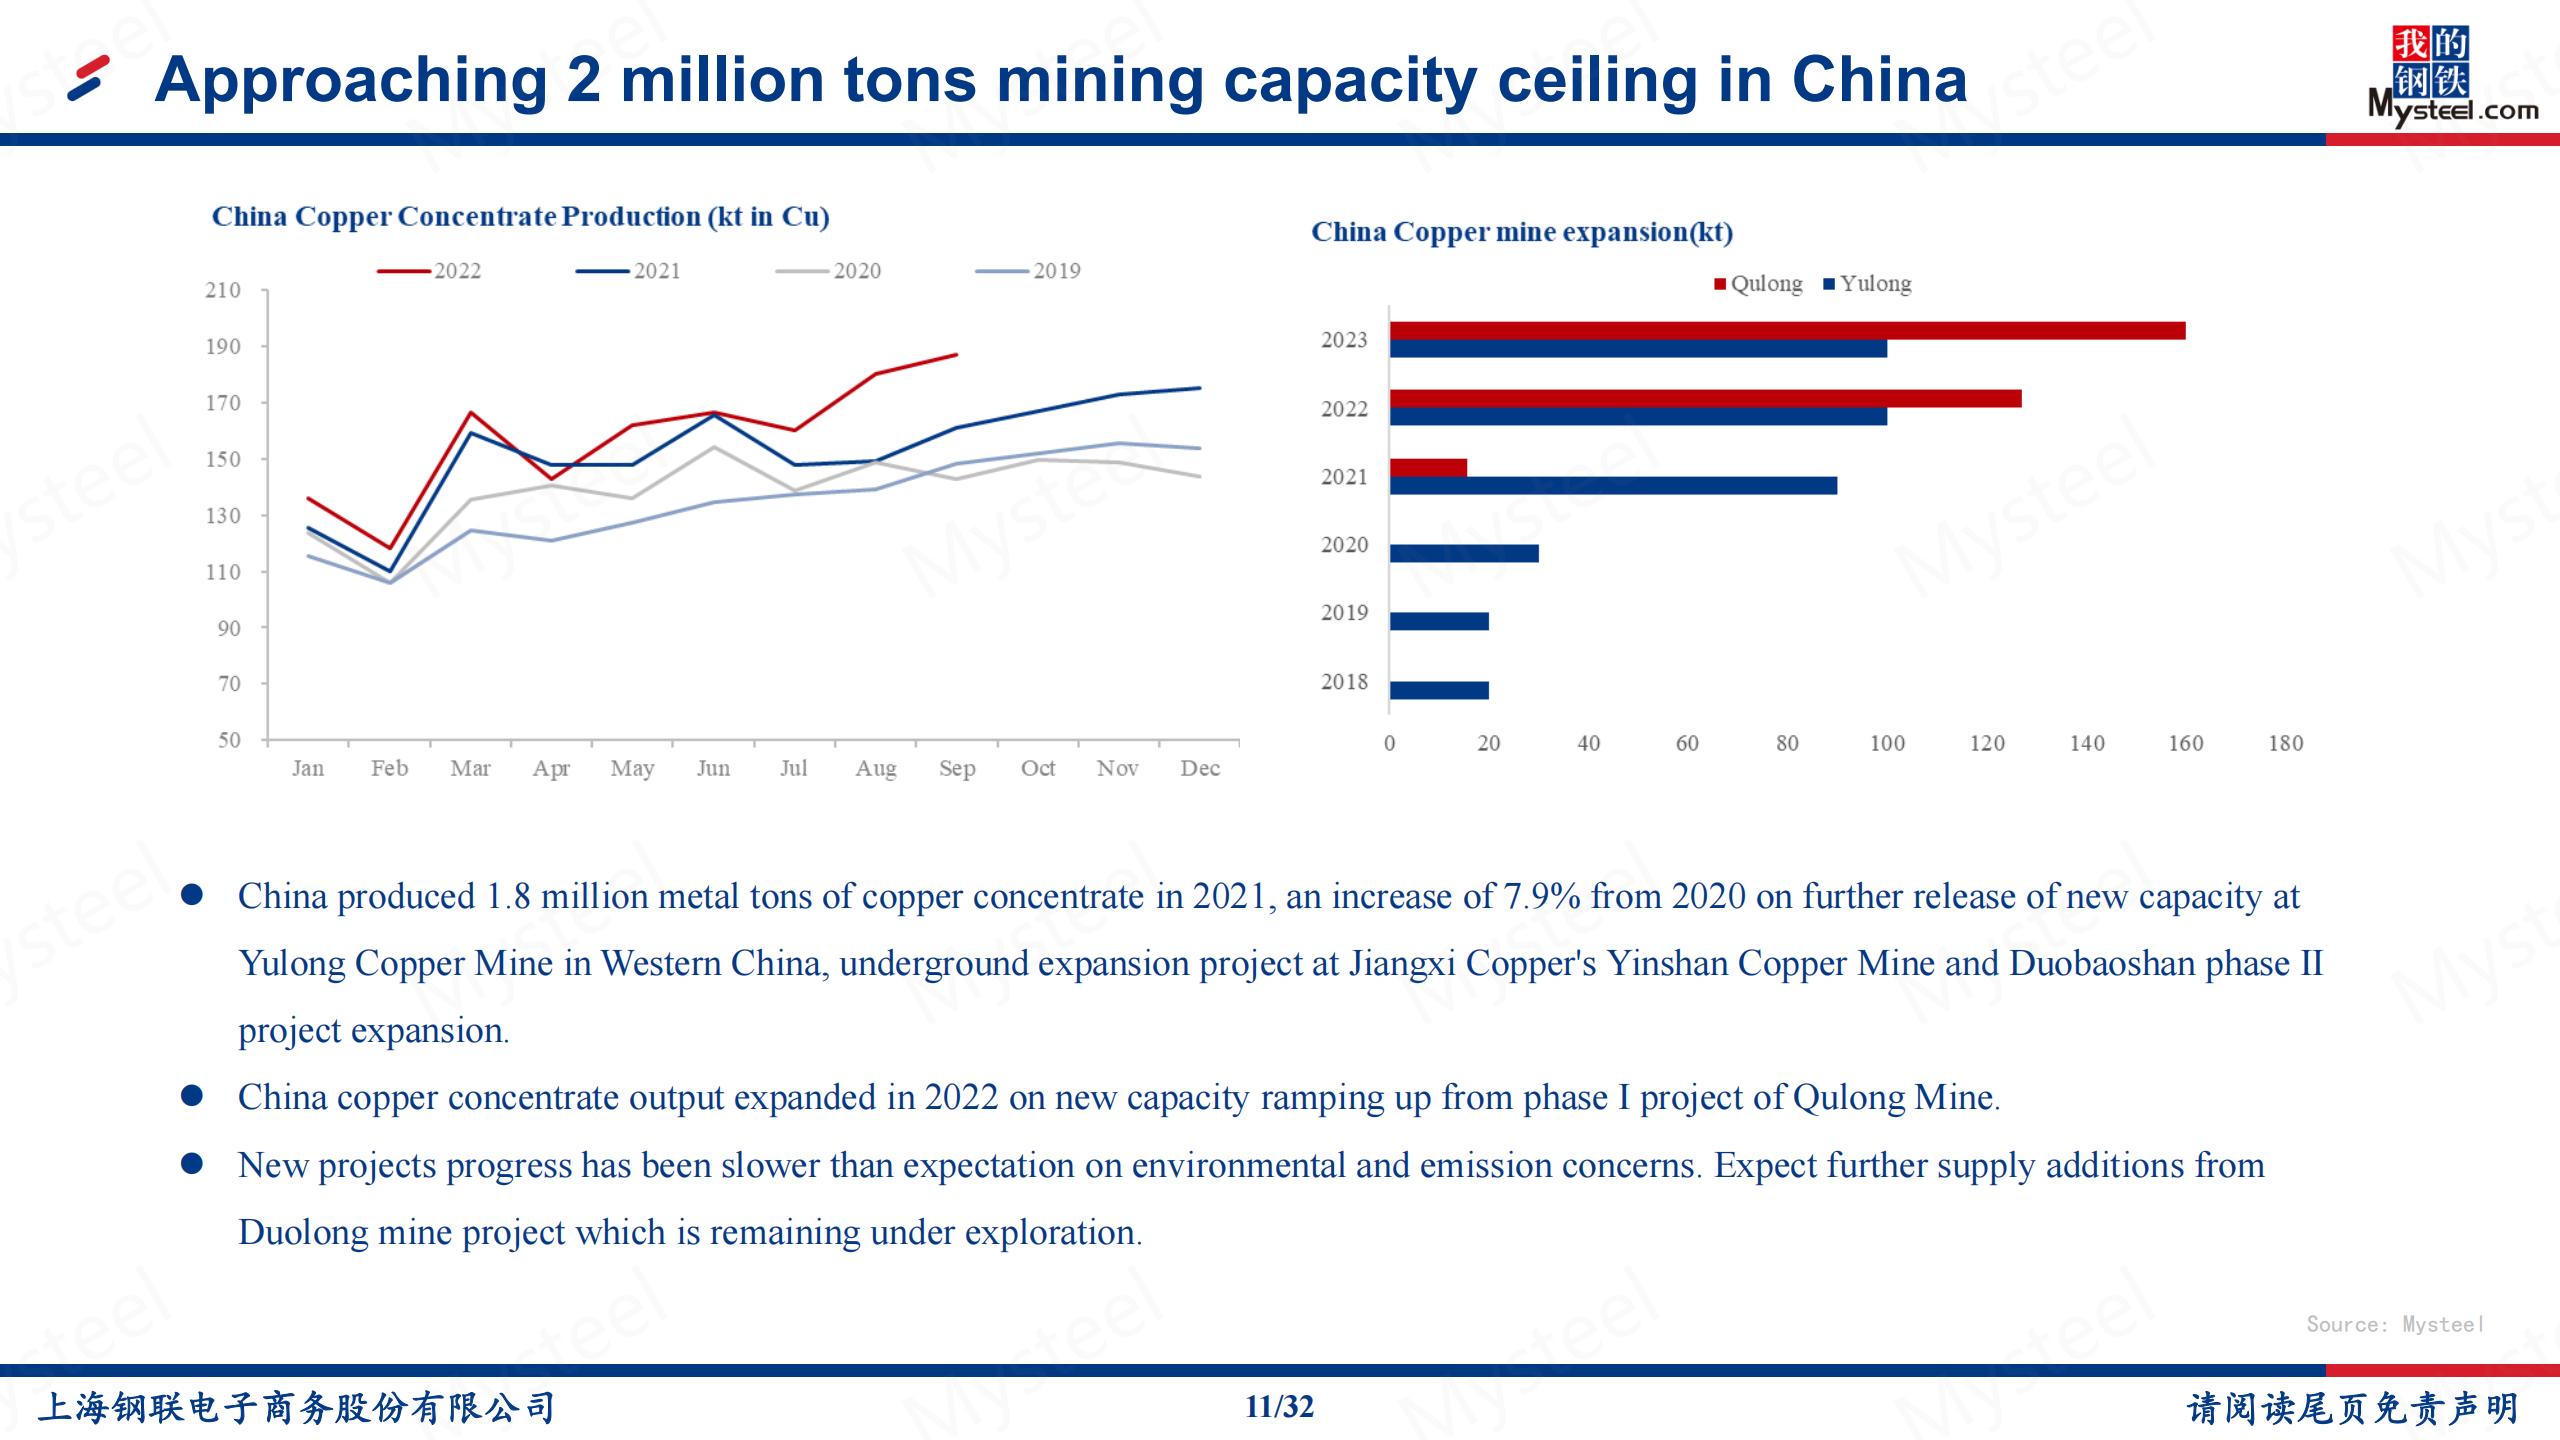 copper mining capacity in China